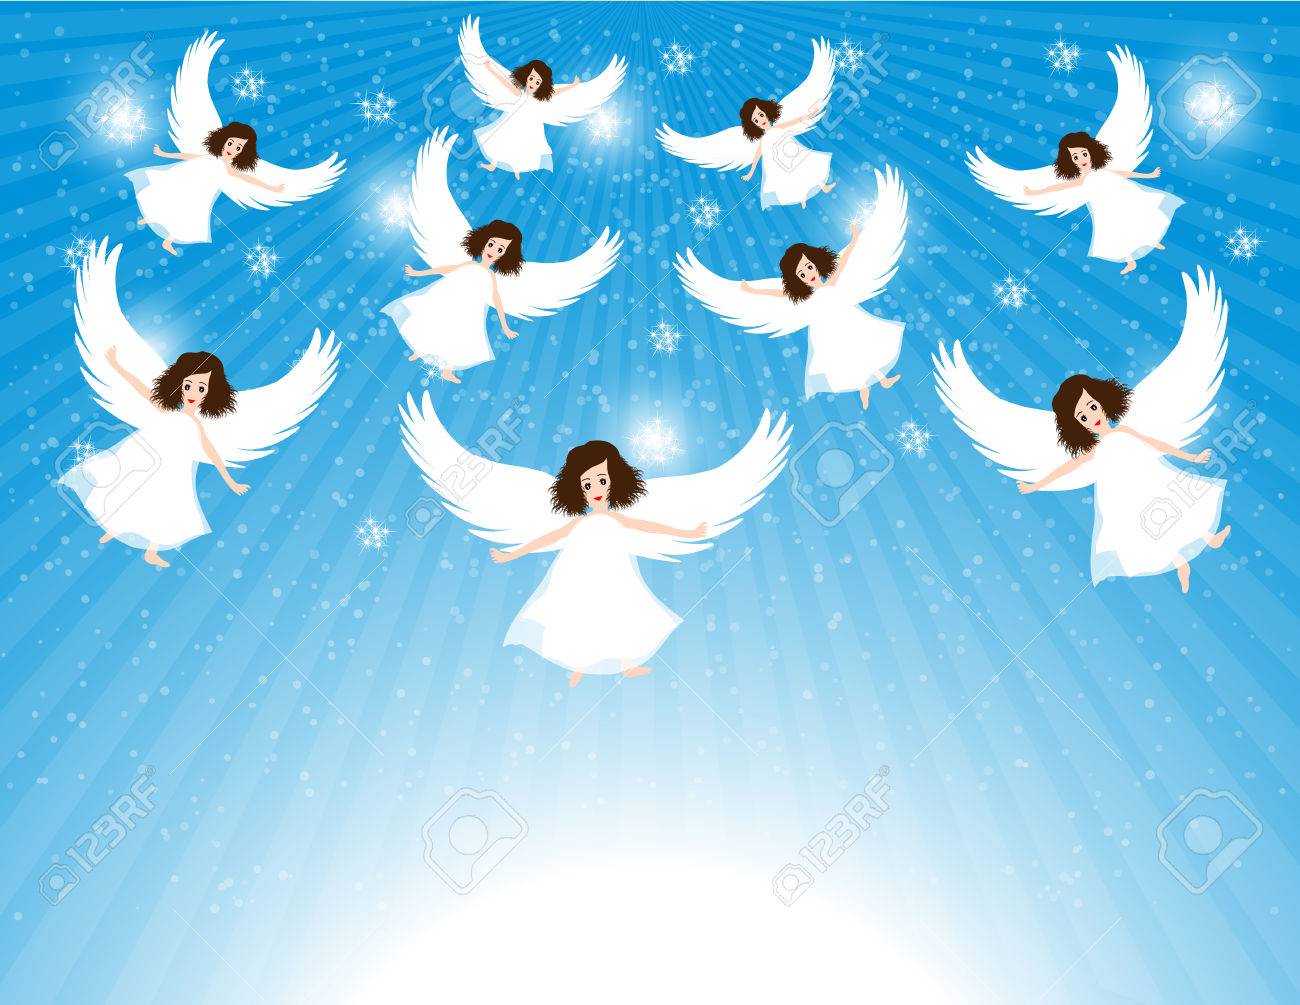 Free angels clipart.